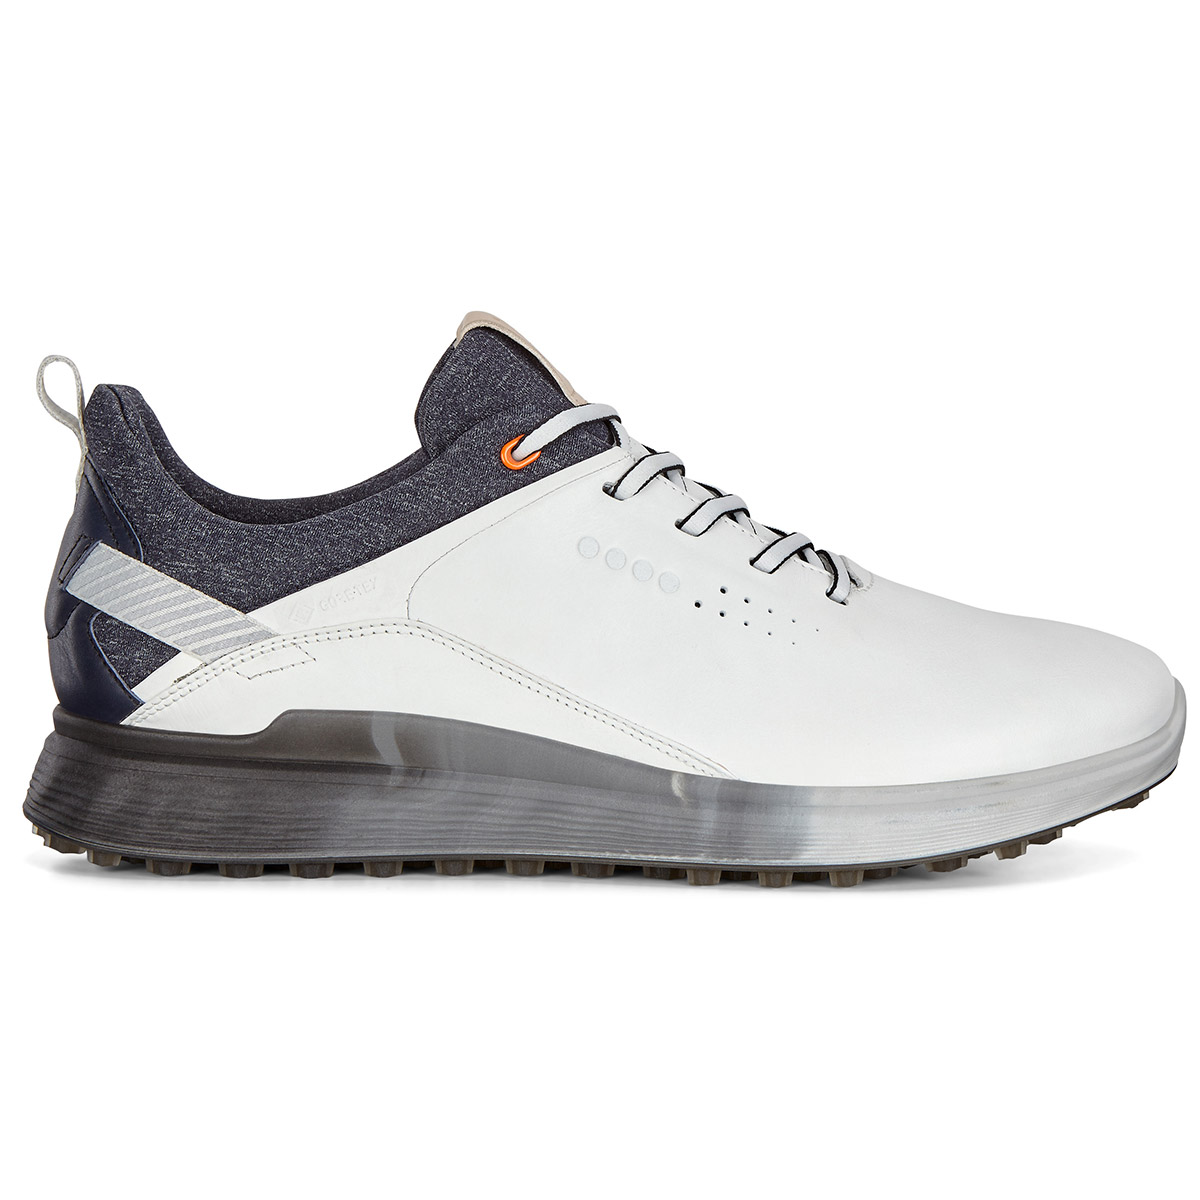 ECCO Golf S-Three Shoes from american golf